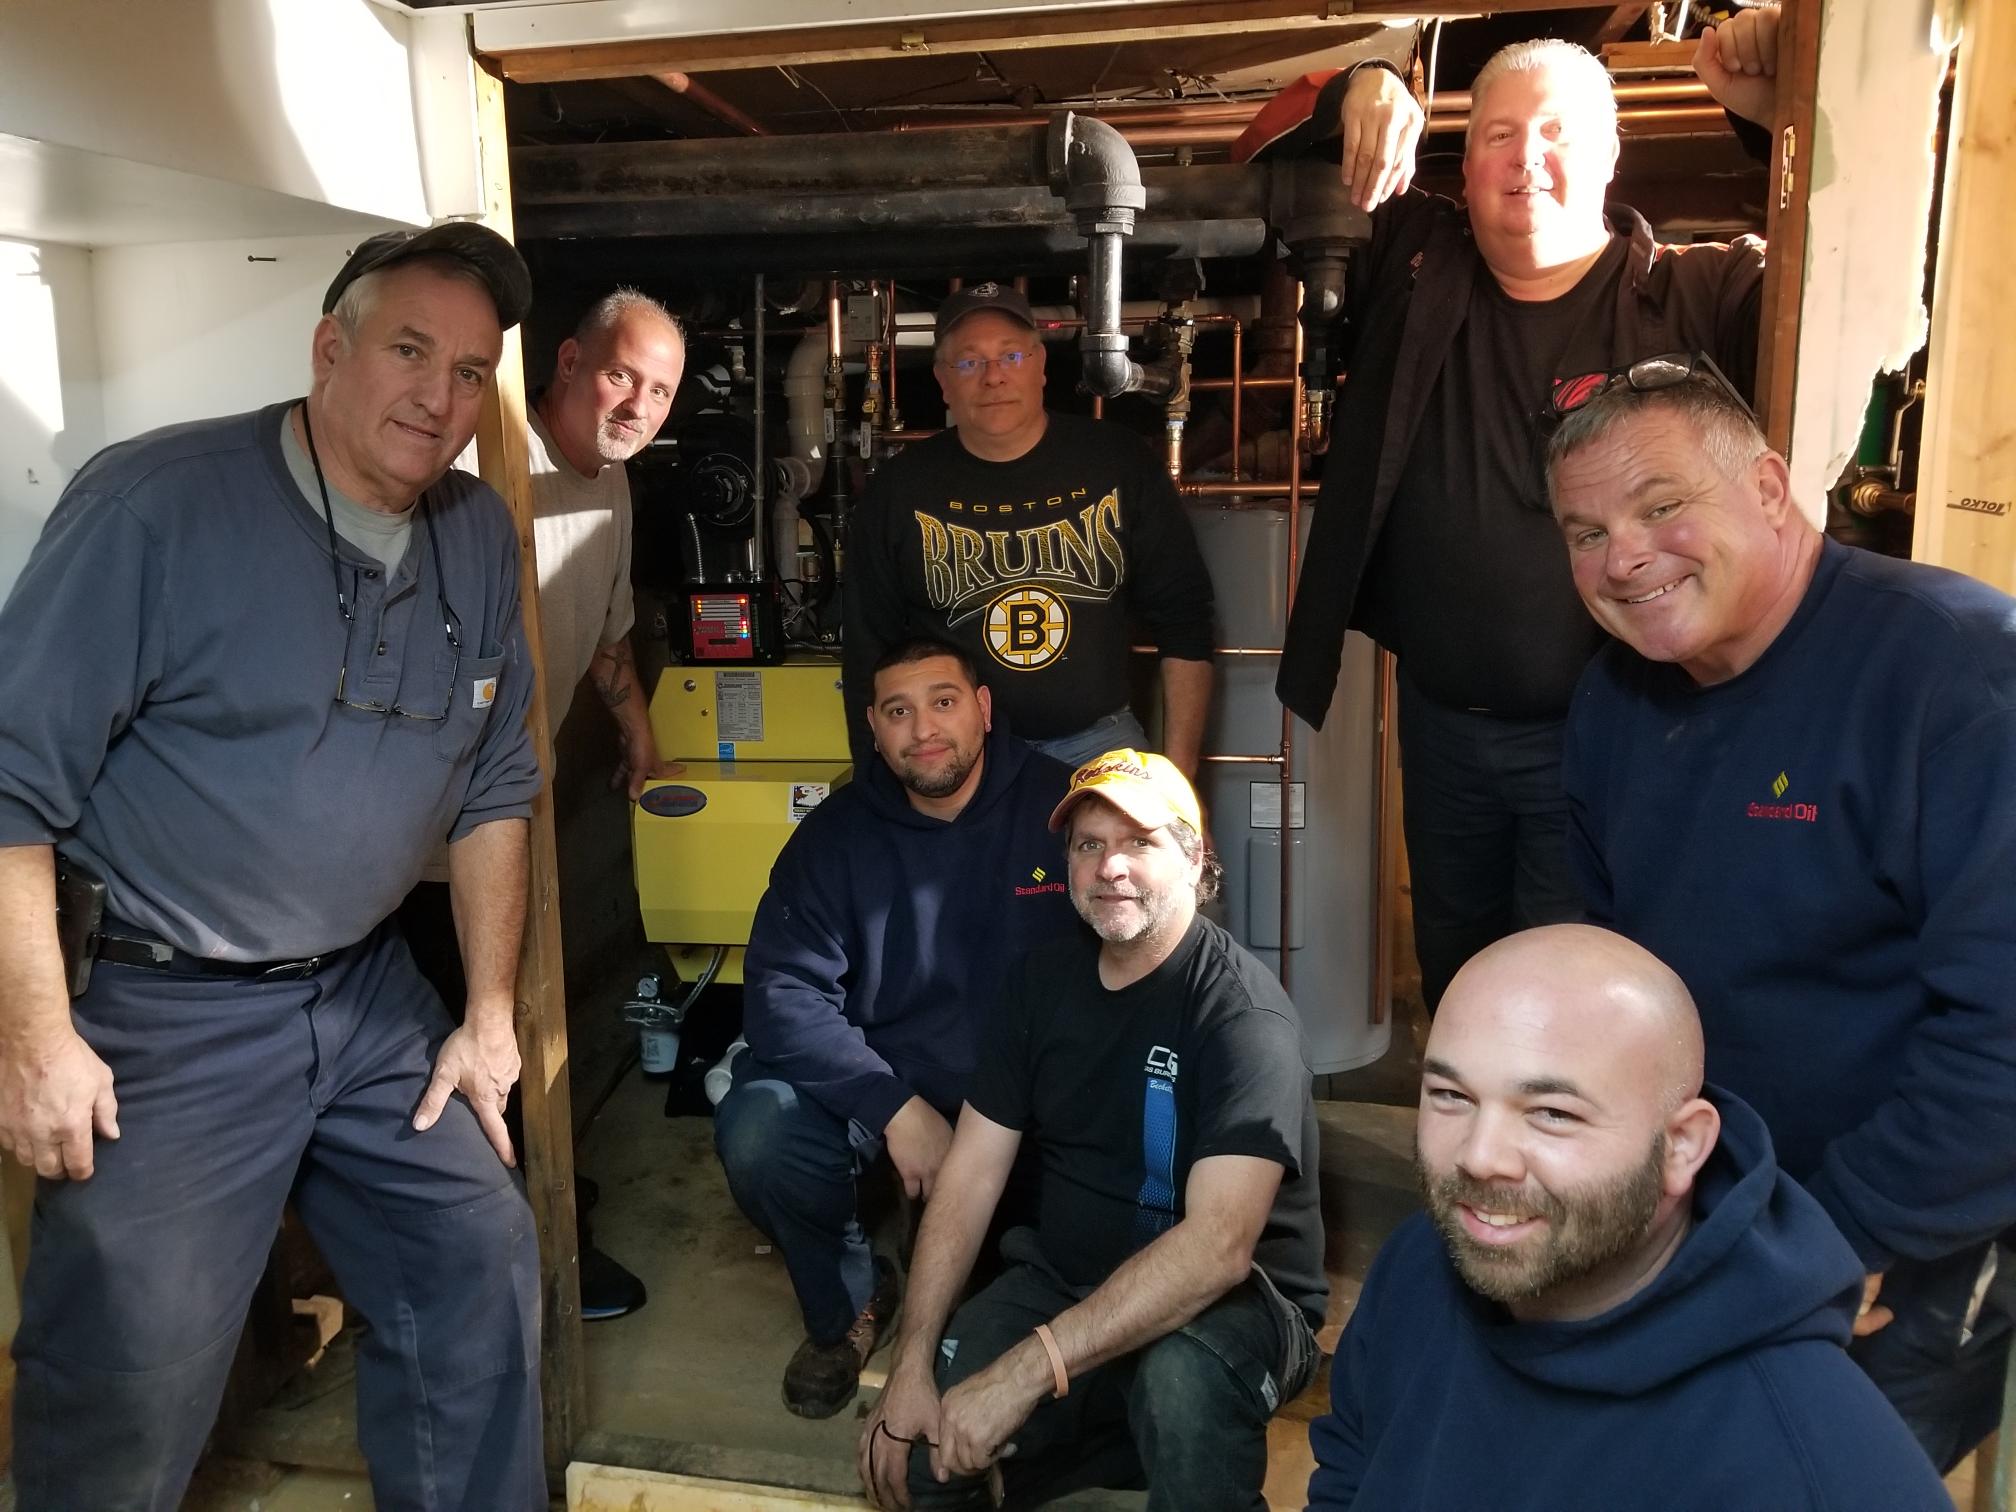 Oil Heat Cares helps flood victims in Fairfield, CT